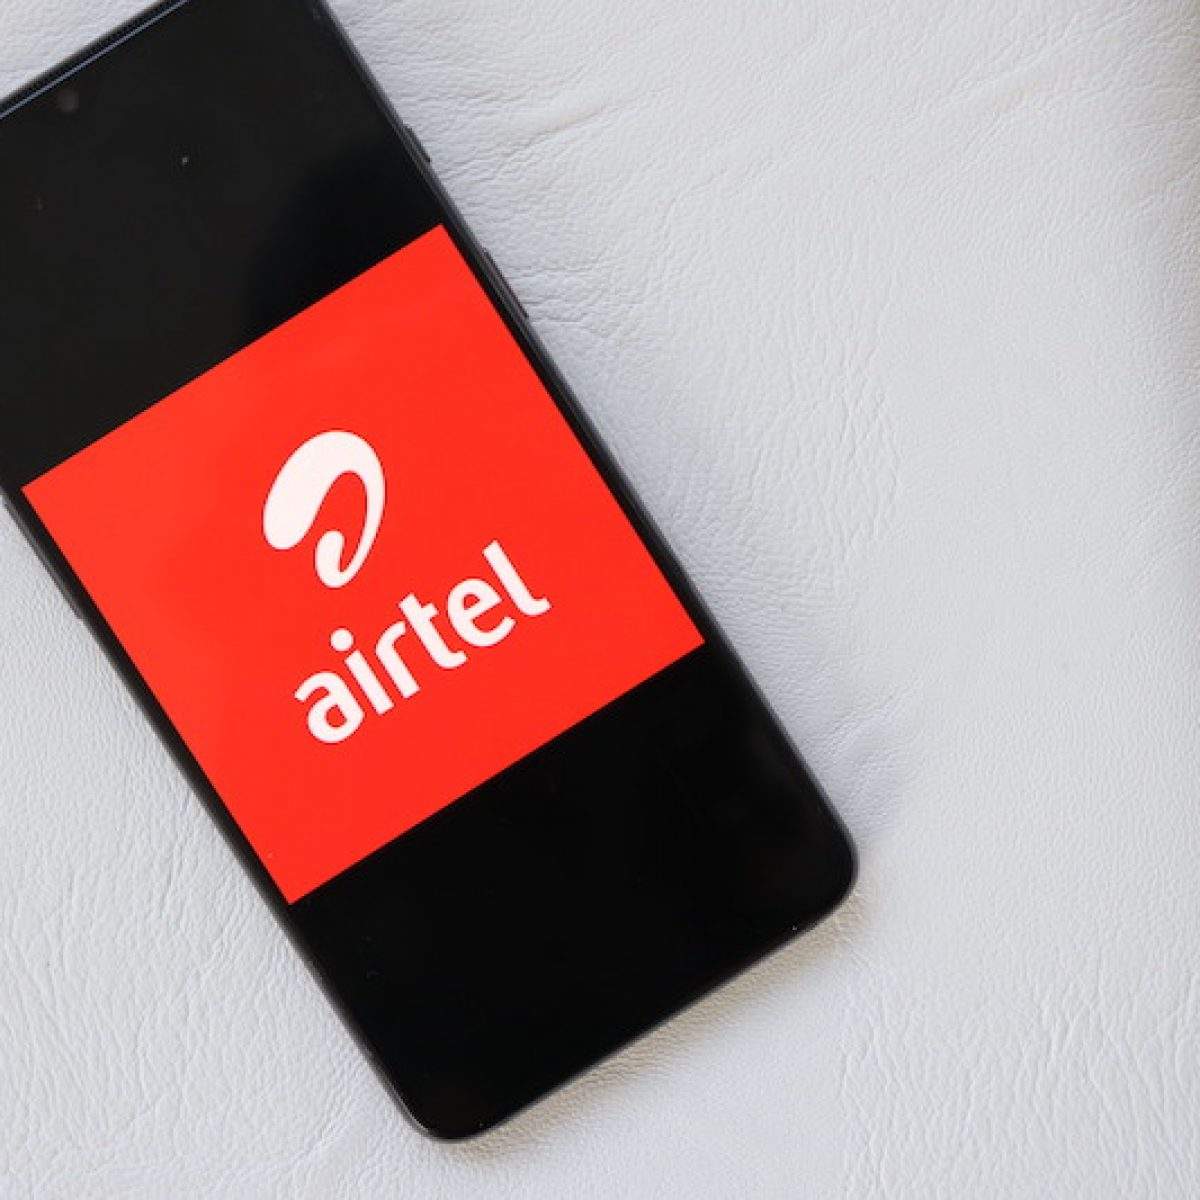 Airtel: Airtel, Nokia tie up for 5G network in Kenya - Latest News